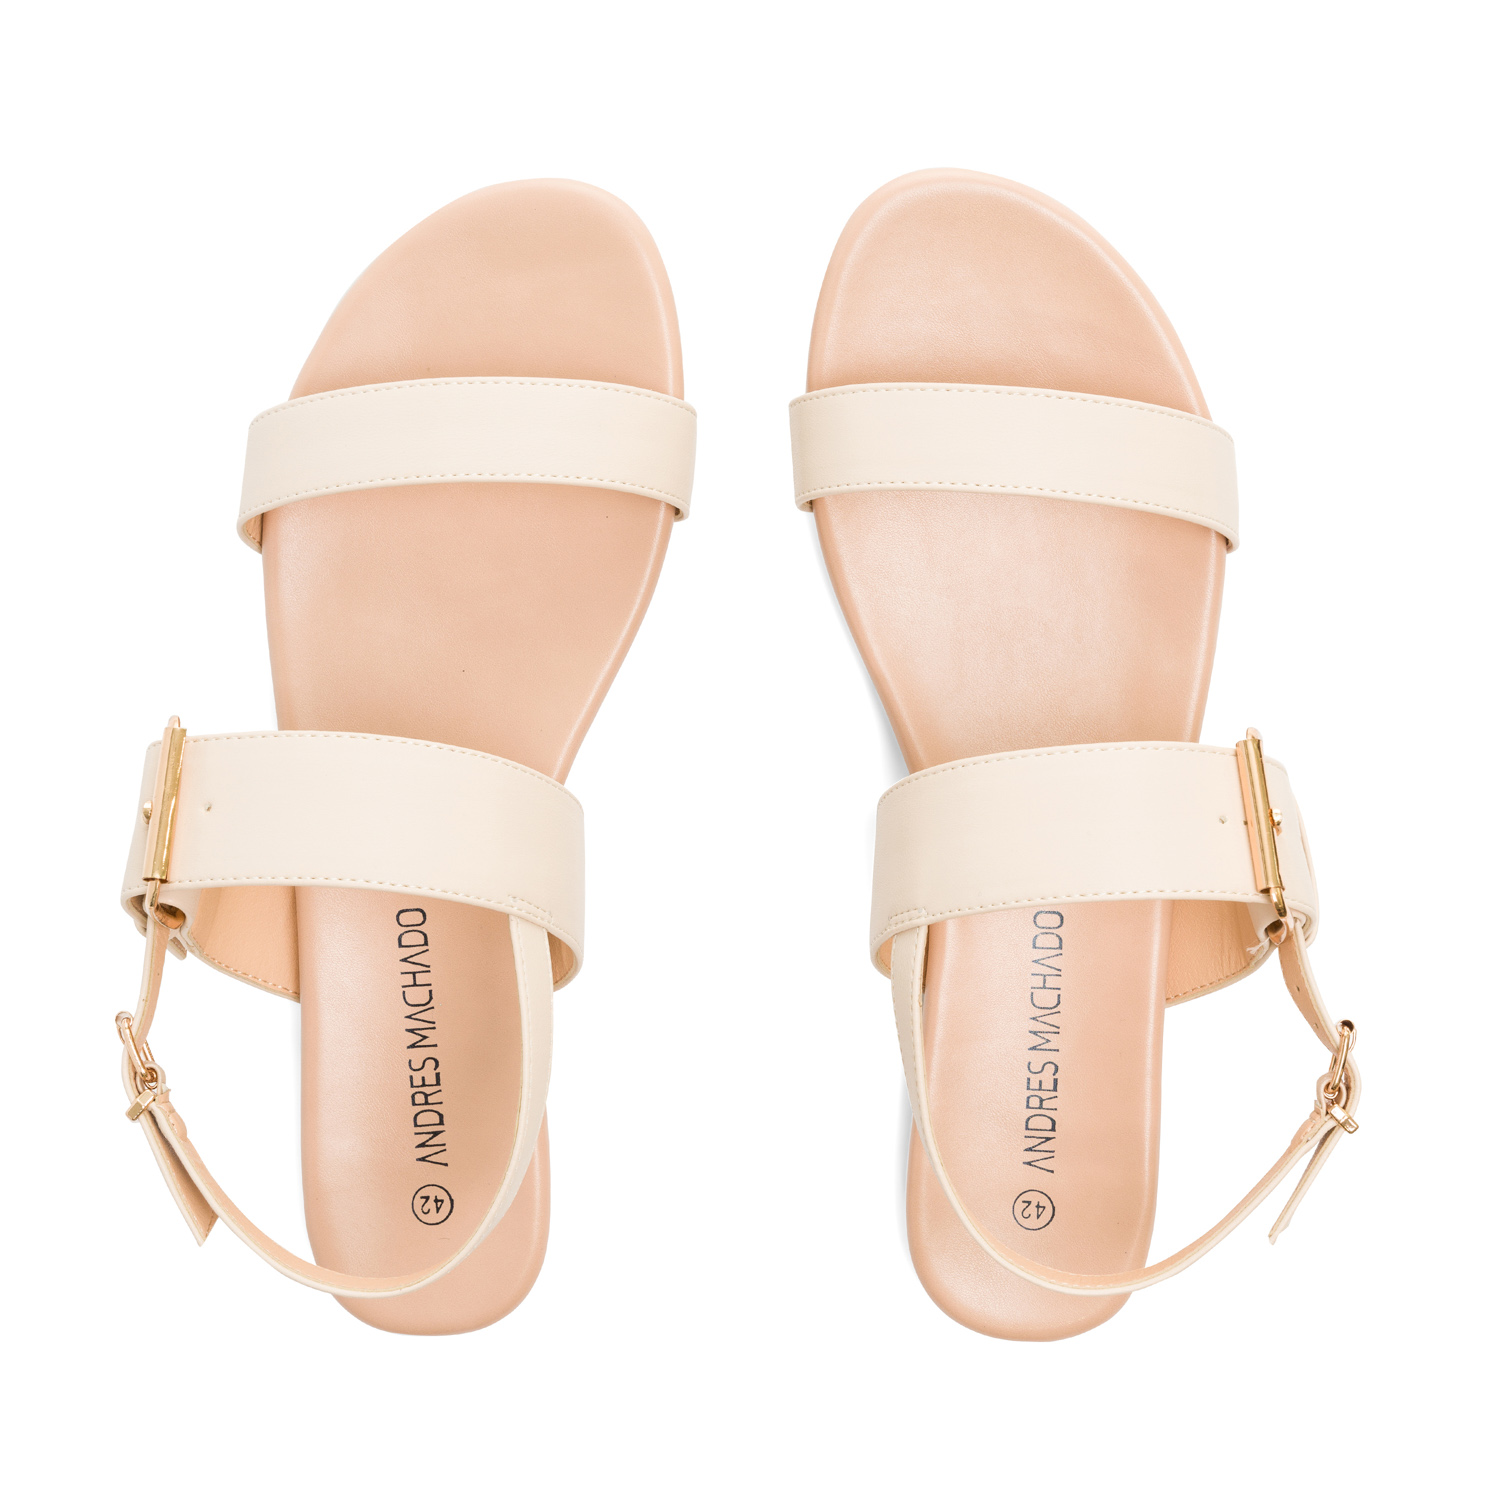 Off-white faux leather flat sandals 